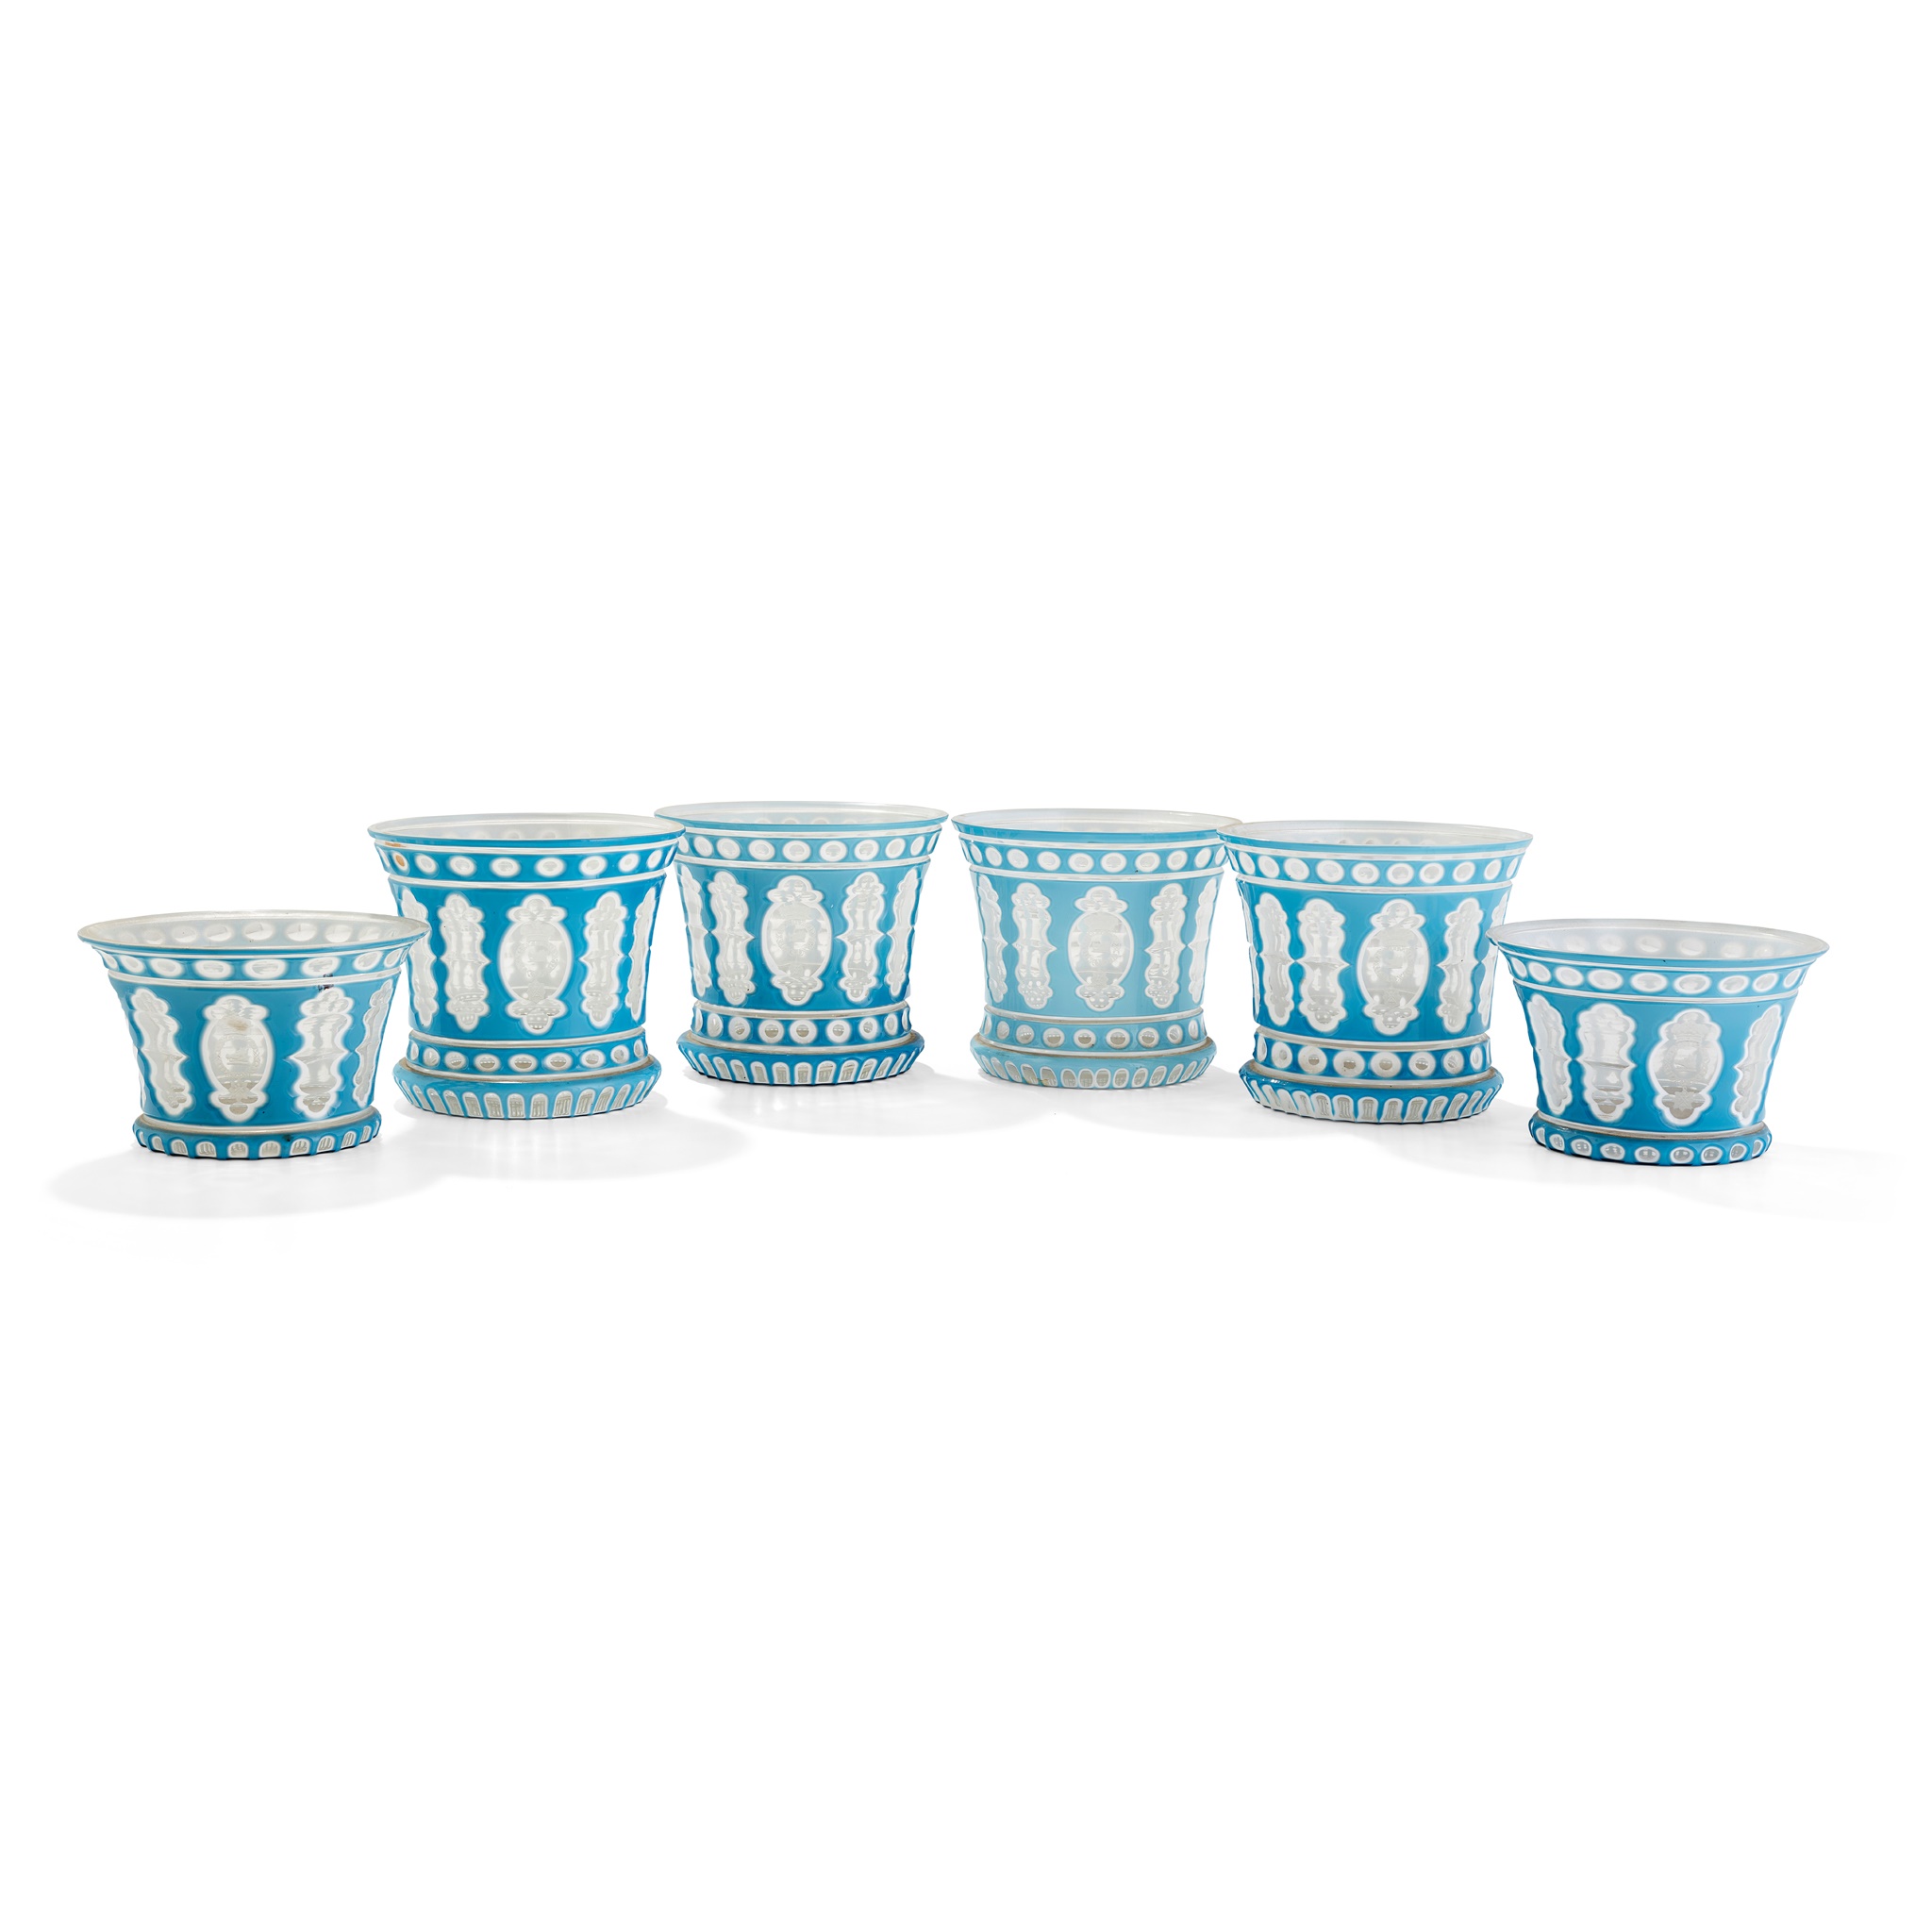 COLLECTION OF BOHEMIAN LAYERED GLASS FINGER BOWLS AND POSY BOWLS ENGRAVED WITH THE BREADALBANE